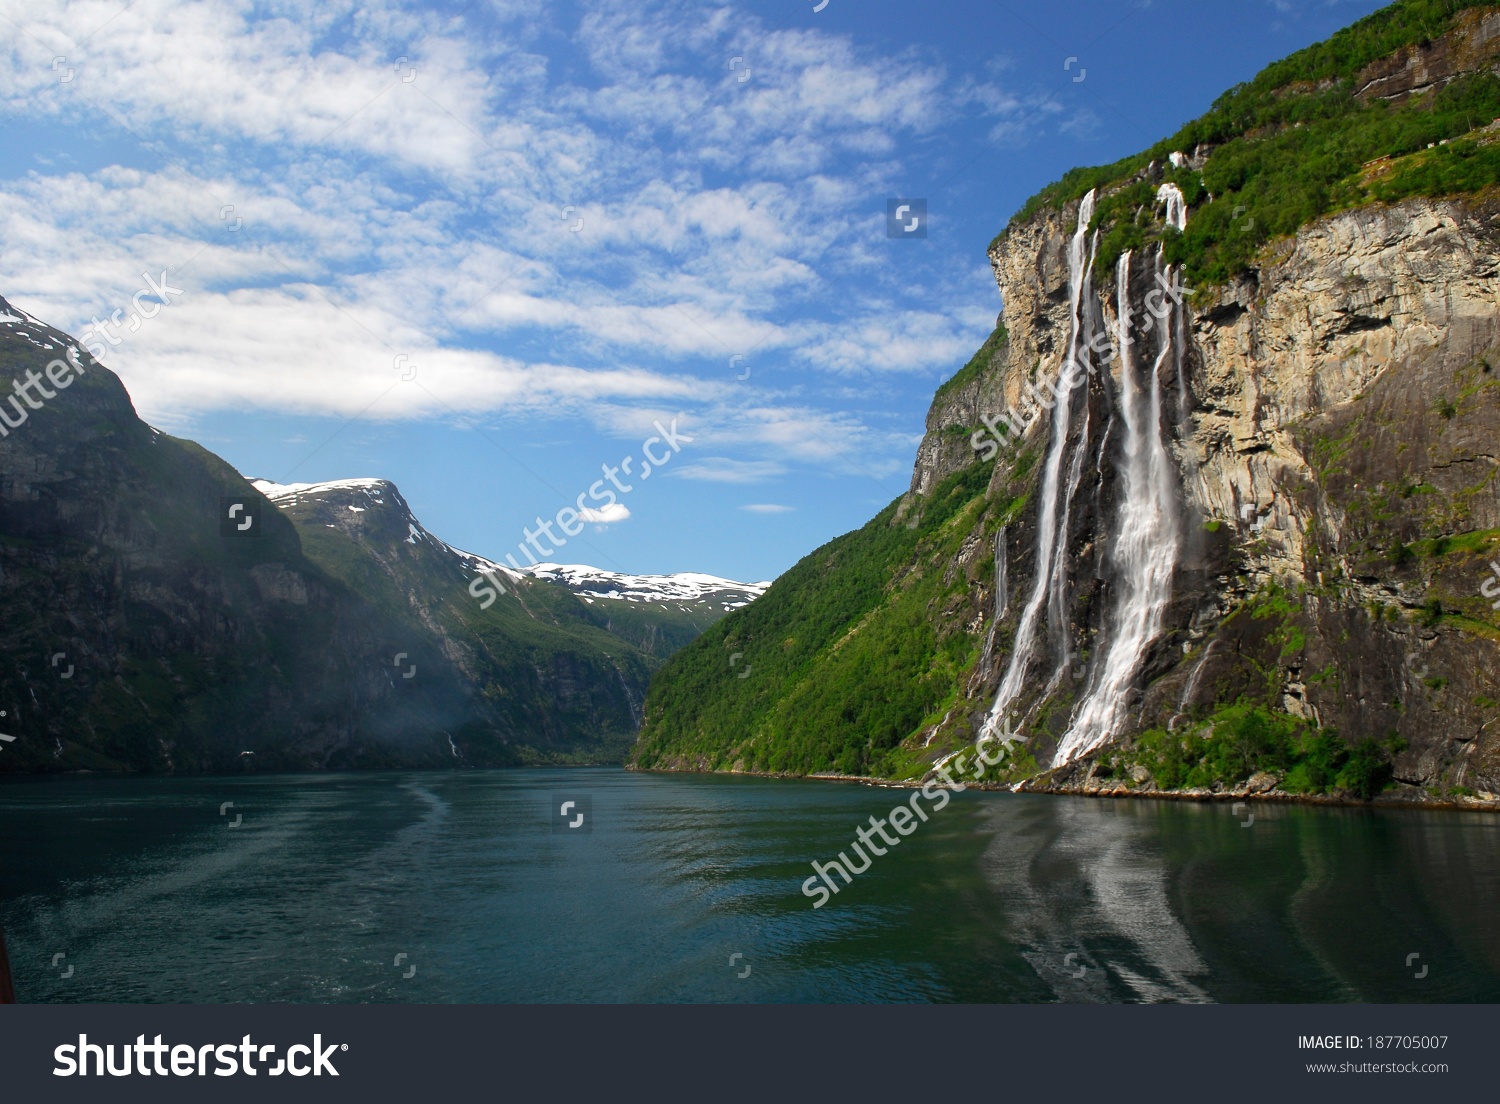 Seven Sisters Waterfall, Norway clipart #14, Download drawings